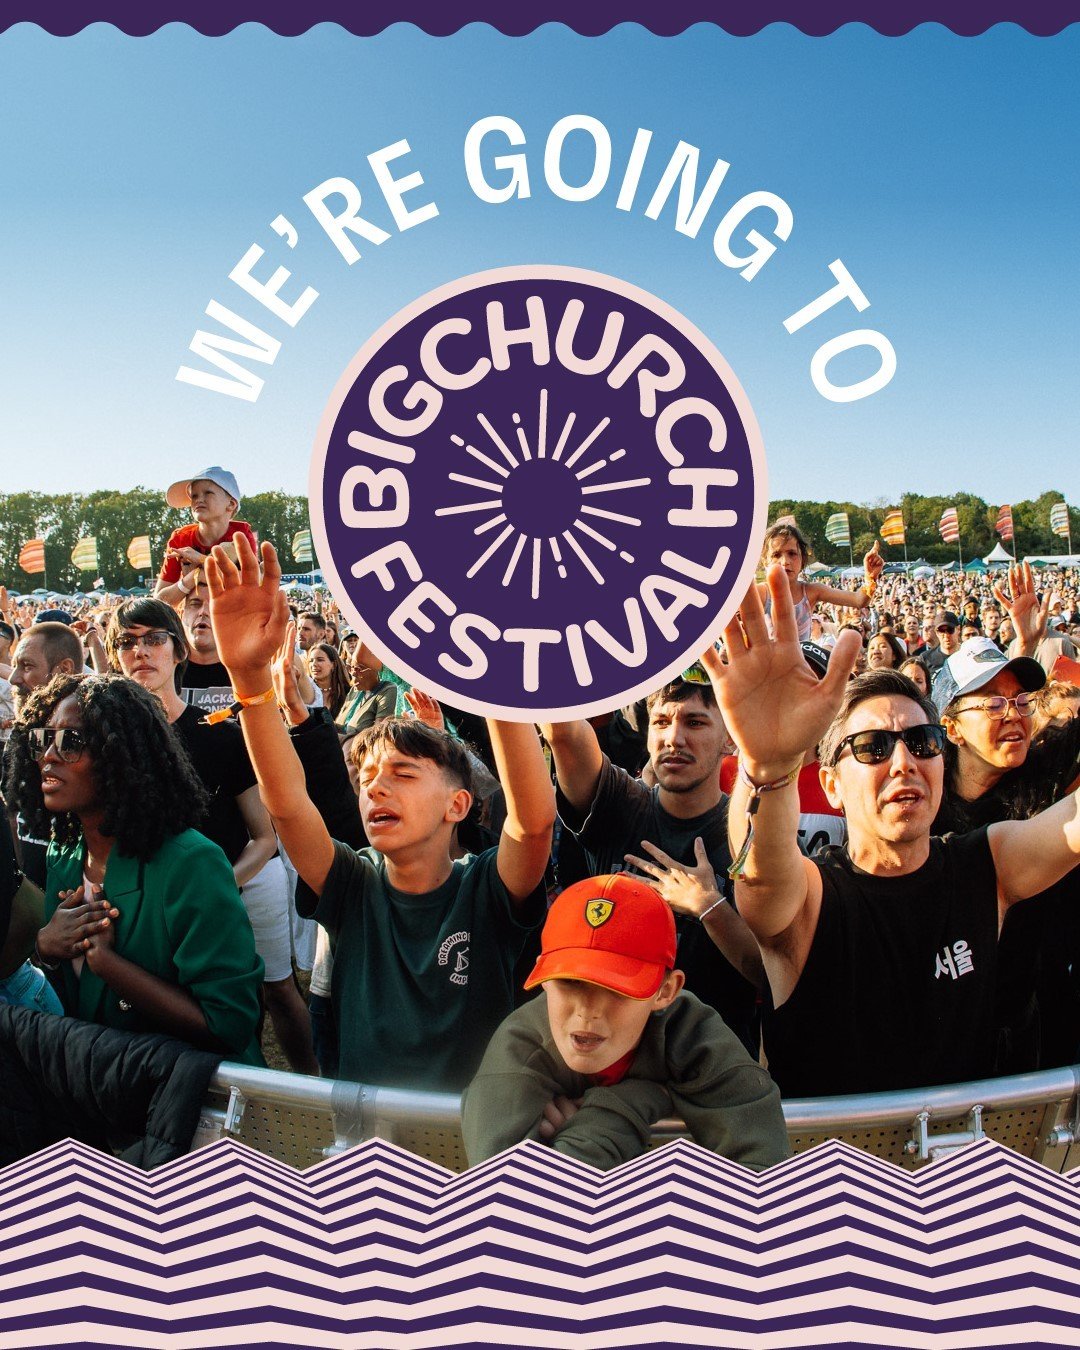 In just a couple of weeks, we'll be spreading the word about St. Marks Academy @bigchurchfest - if you're there or you know someone who is, come say hi at our stand in the Expo tent! 

#leadership #apprenticeship #internship #yearout #sentfromcoventr